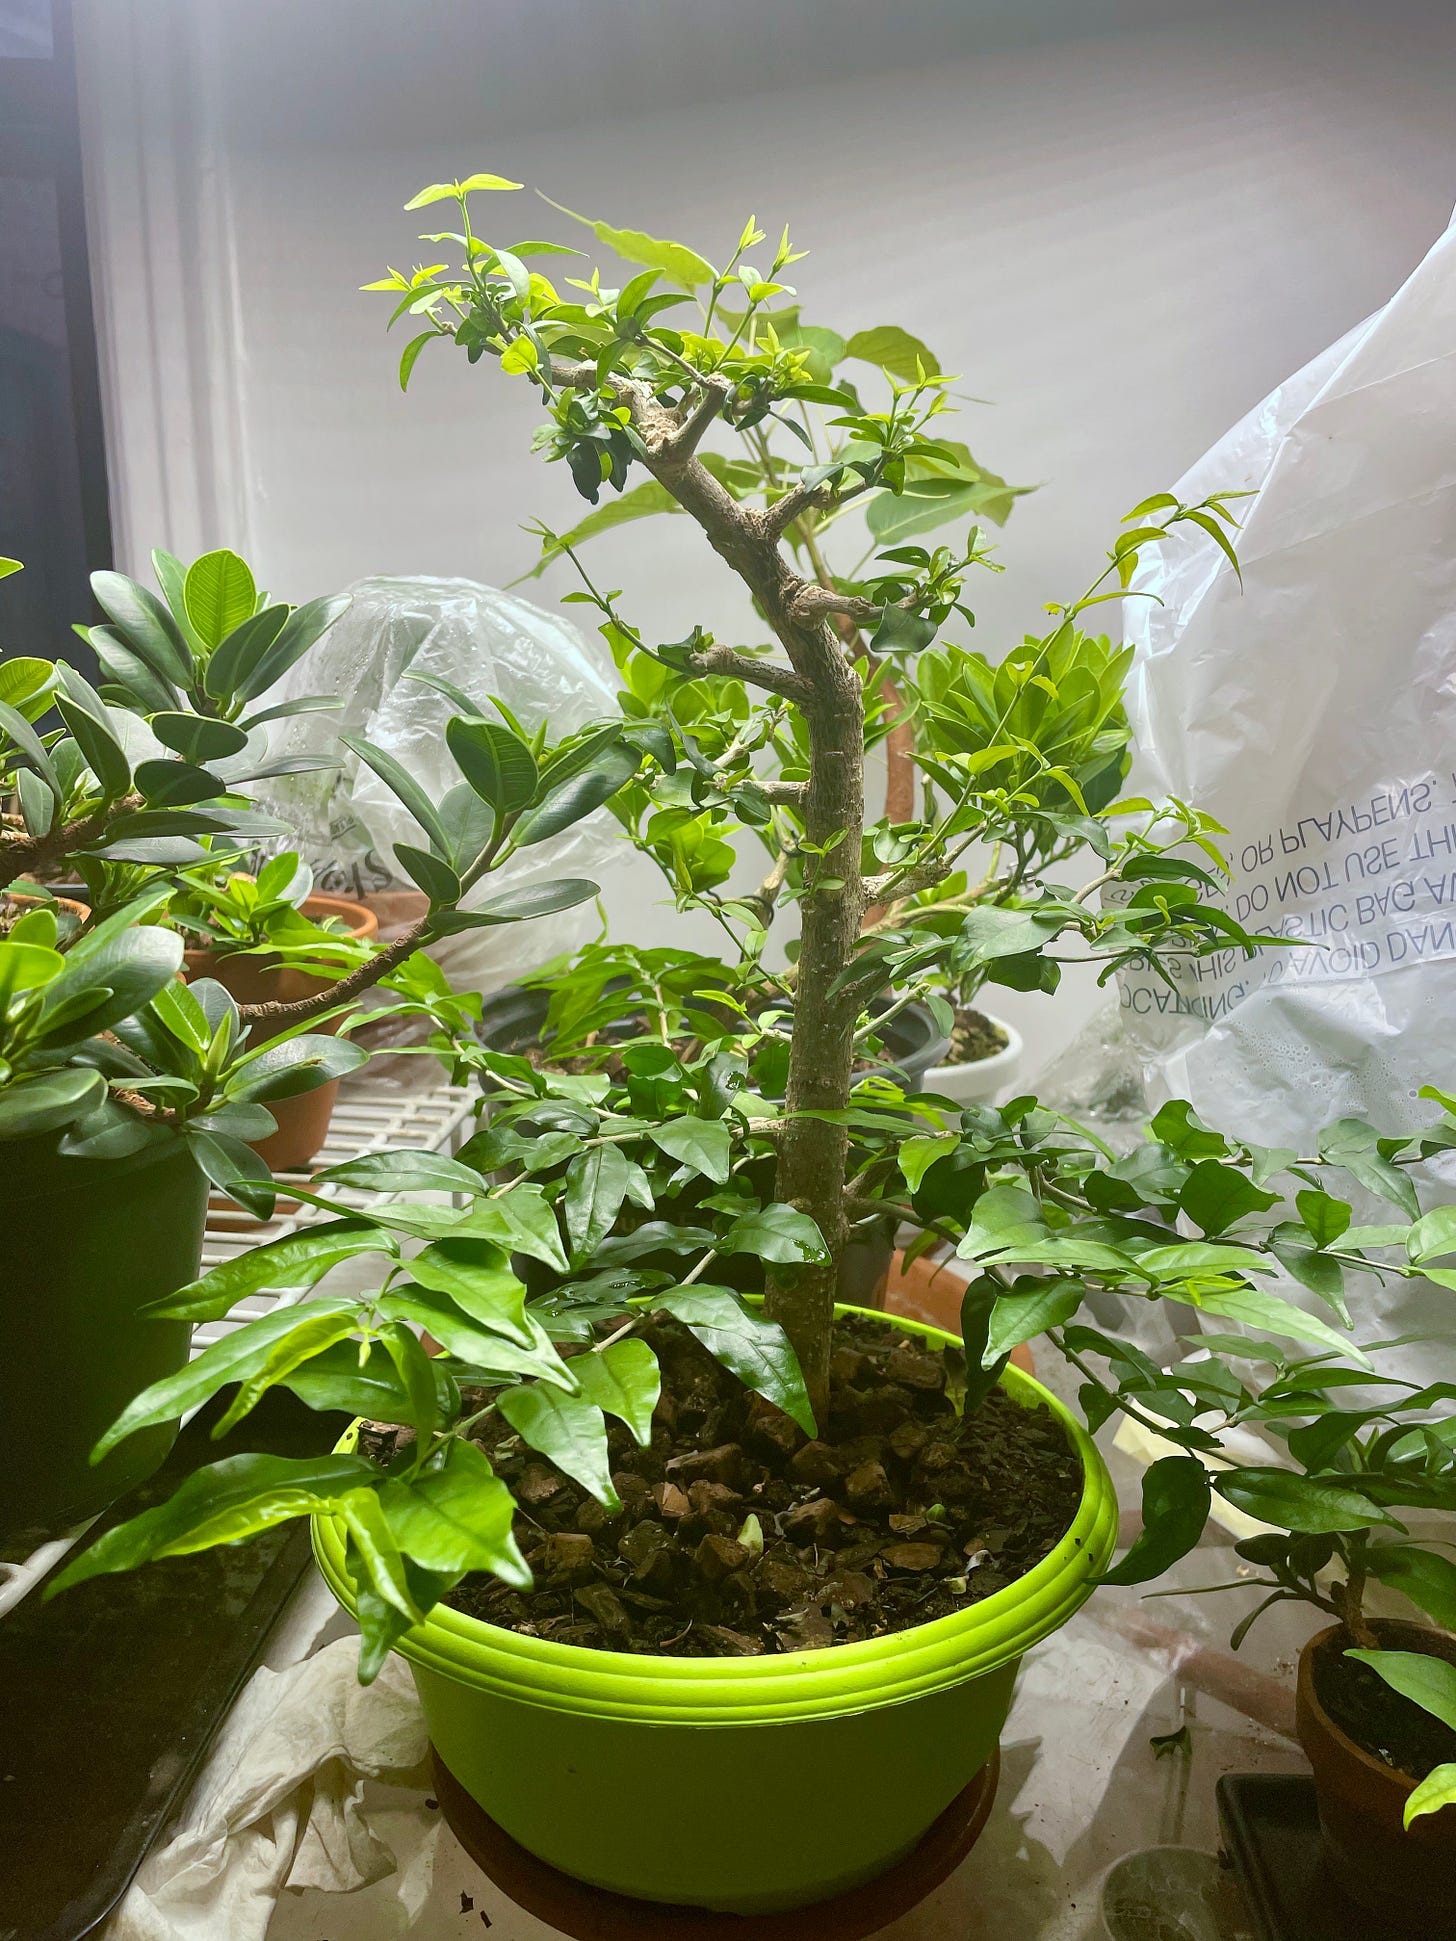 ID: Photo of my water jasmine tree on my indoor growing table. The upper branches are trimmed short and the lower thinner ones are elongated. Trees stuck inside plastic bags can be seen in the background.